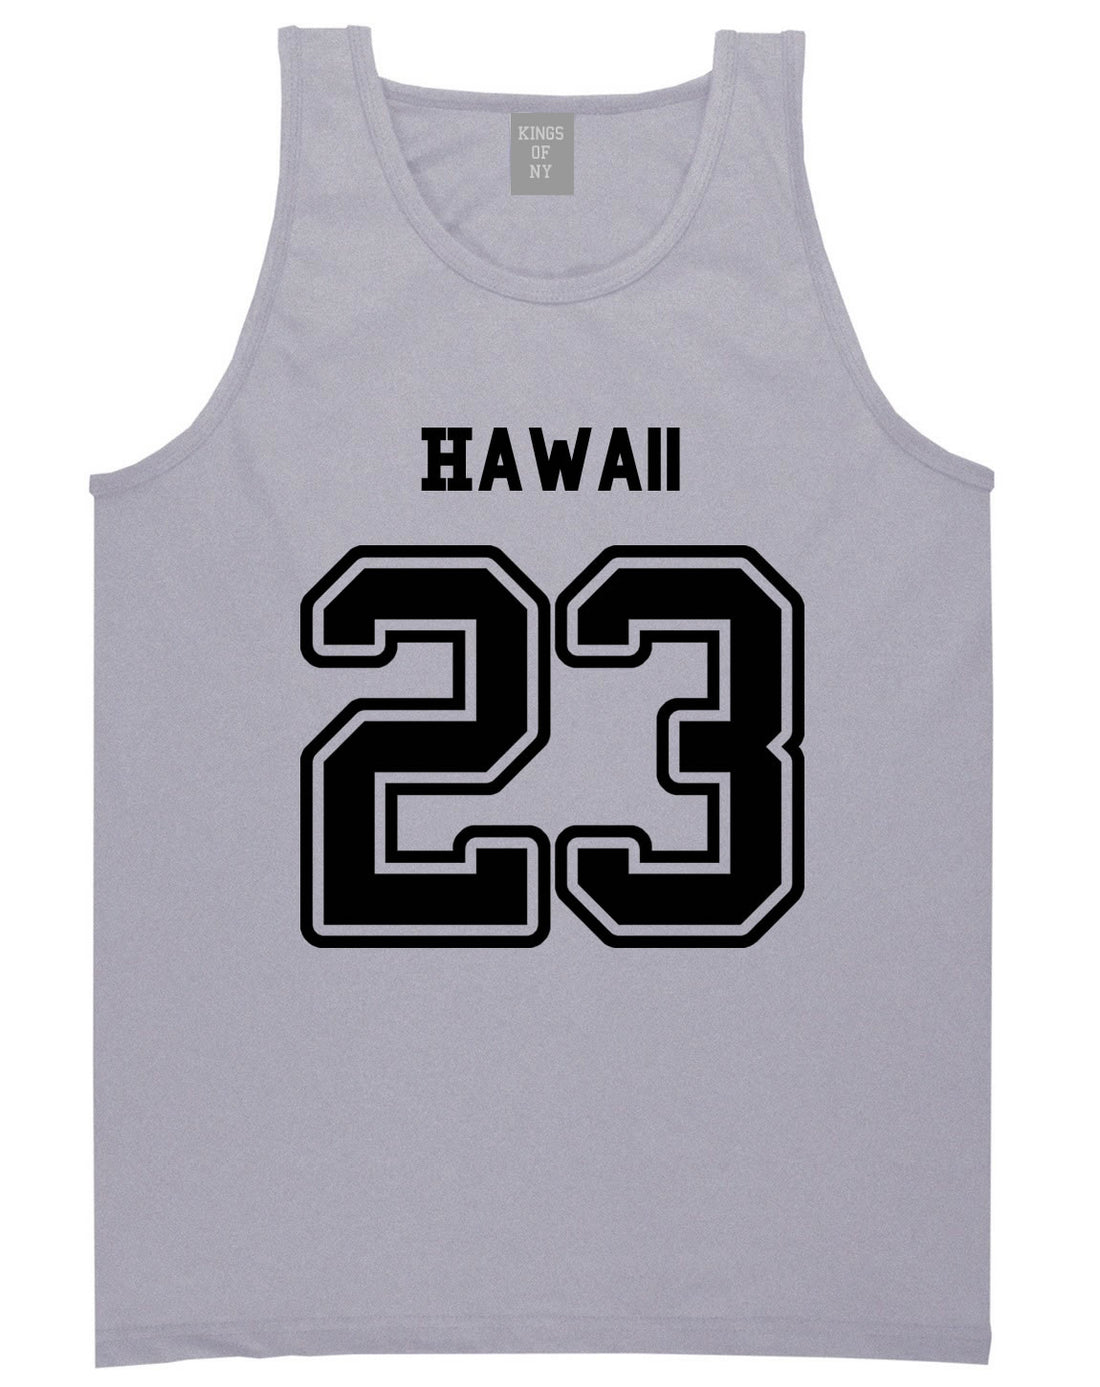 Sport Style Hawaii 23 Team State Jersey Mens Tank Top By Kings Of NY